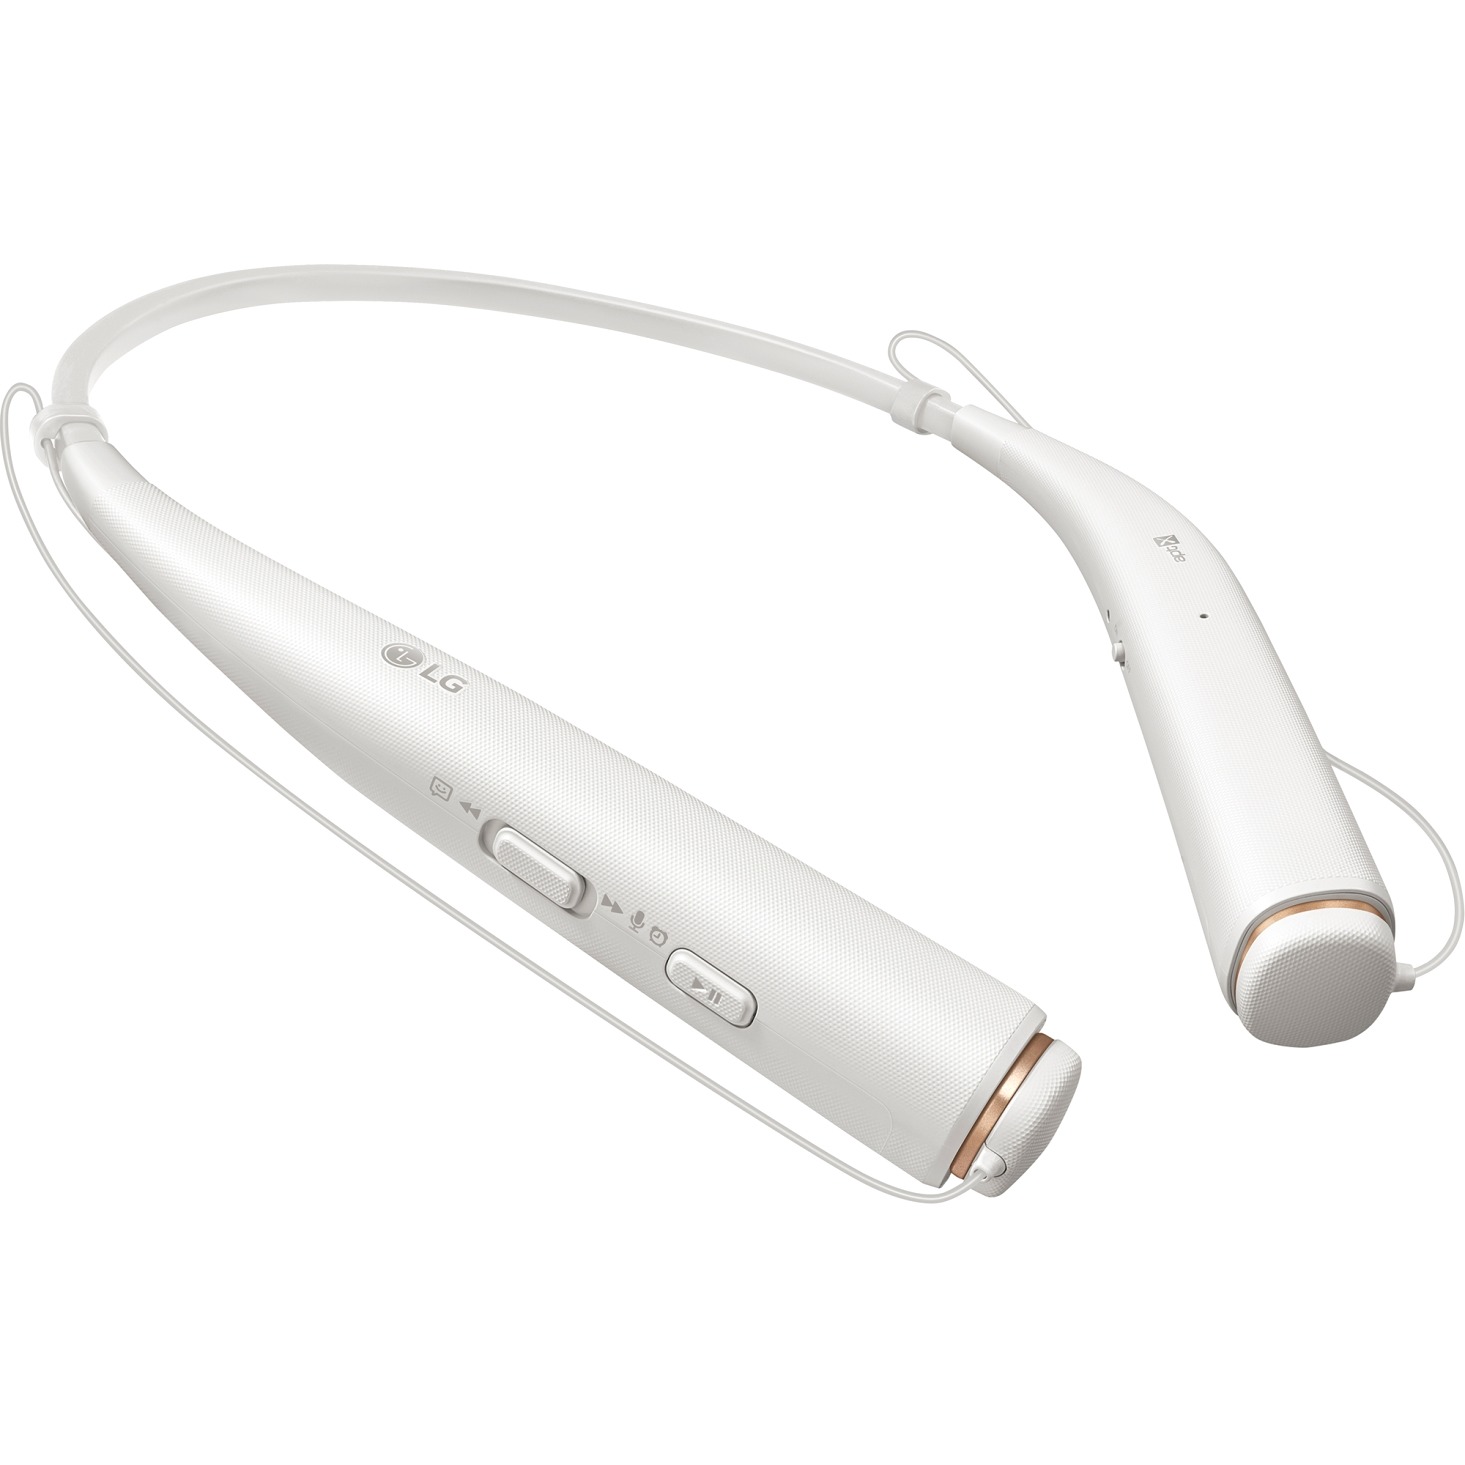 LG HBS780WHT TONE PRO Bluetooth Stereo Headset - White - image 5 of 8